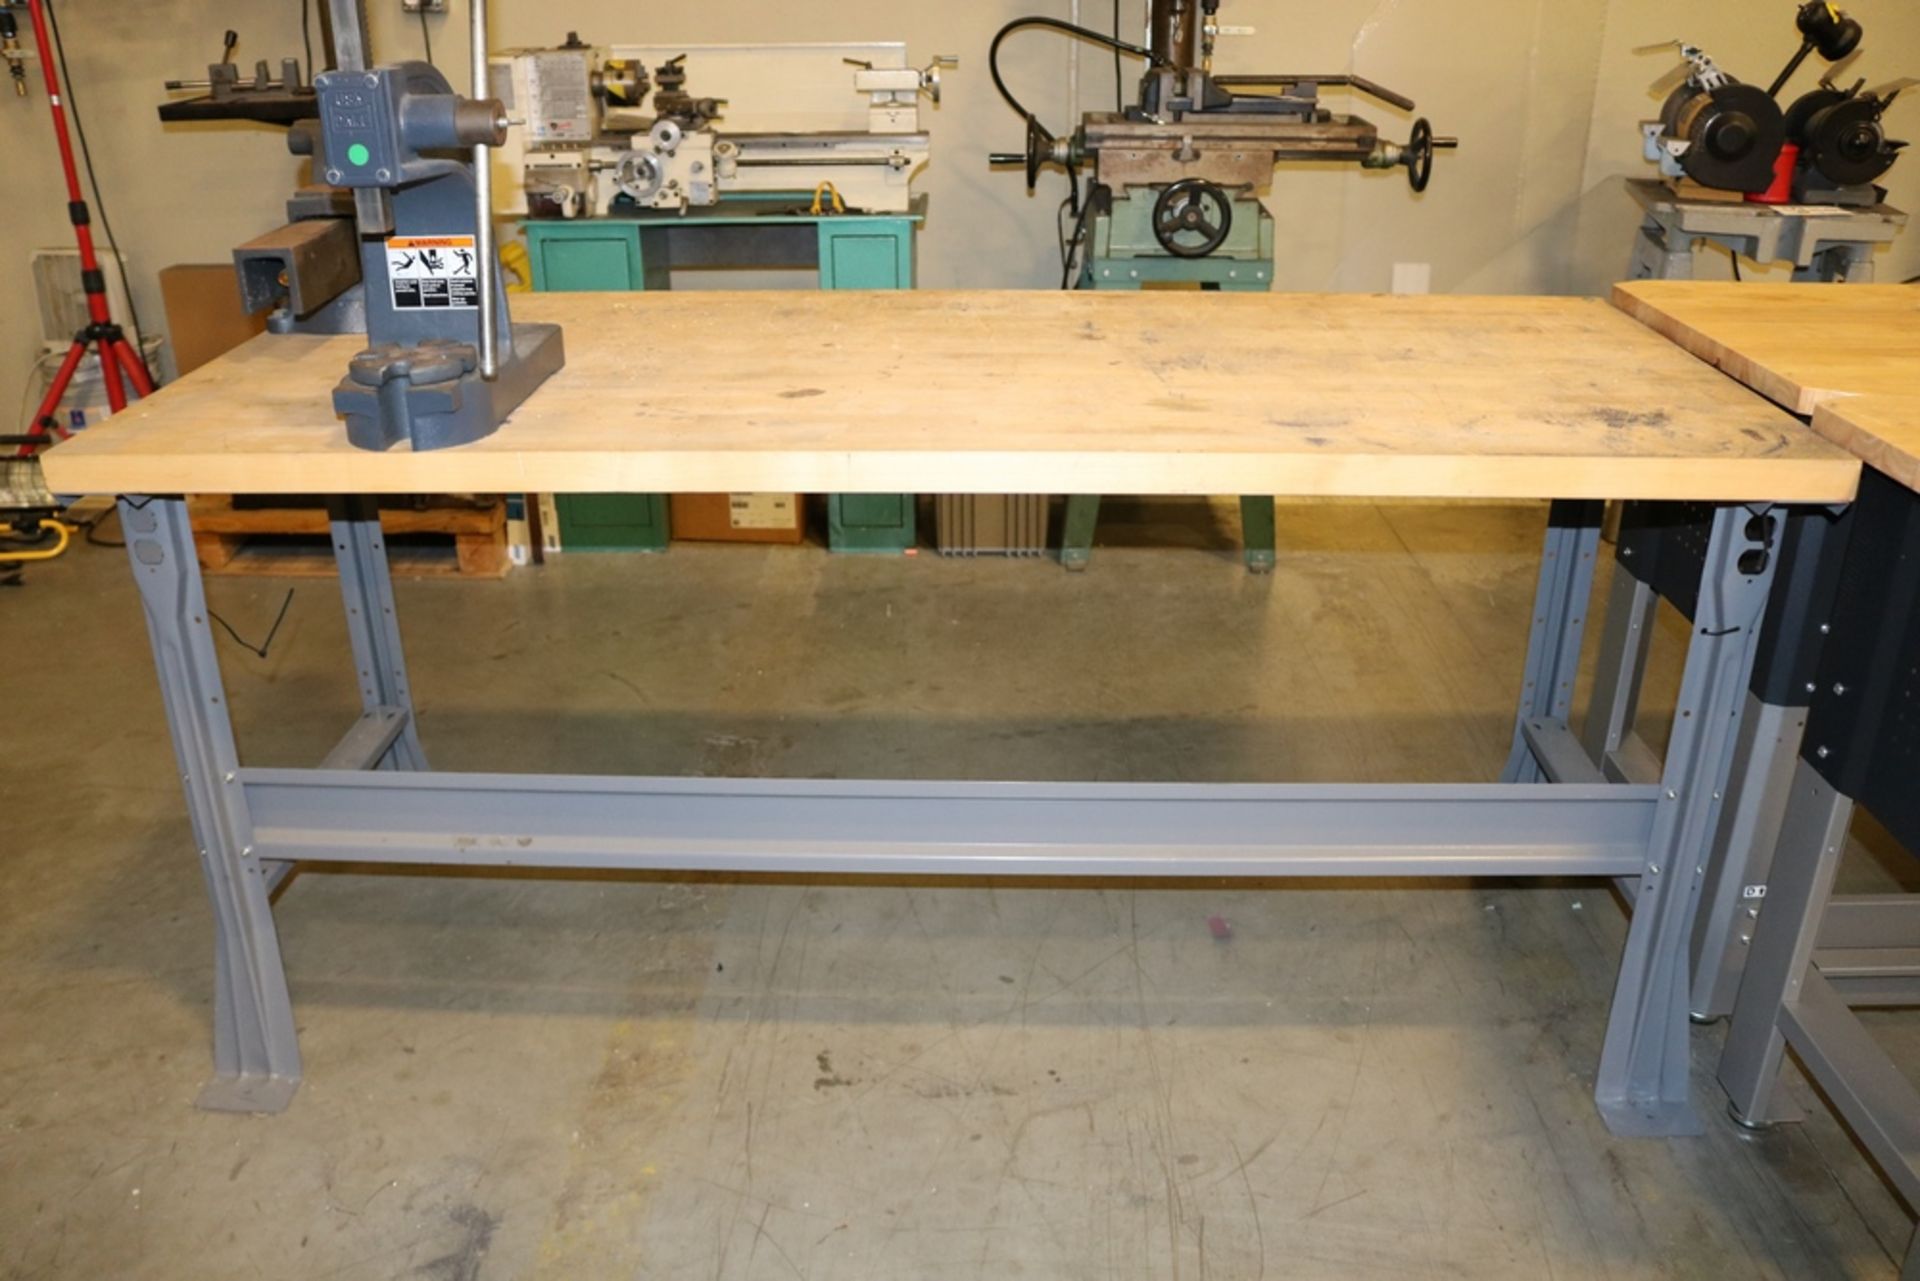 Wilton 8" Jaw Table Vice & Drake Abror Press No 0 With Wood Top Work Table 6' x 30" x 33 1/2" - Image 5 of 5